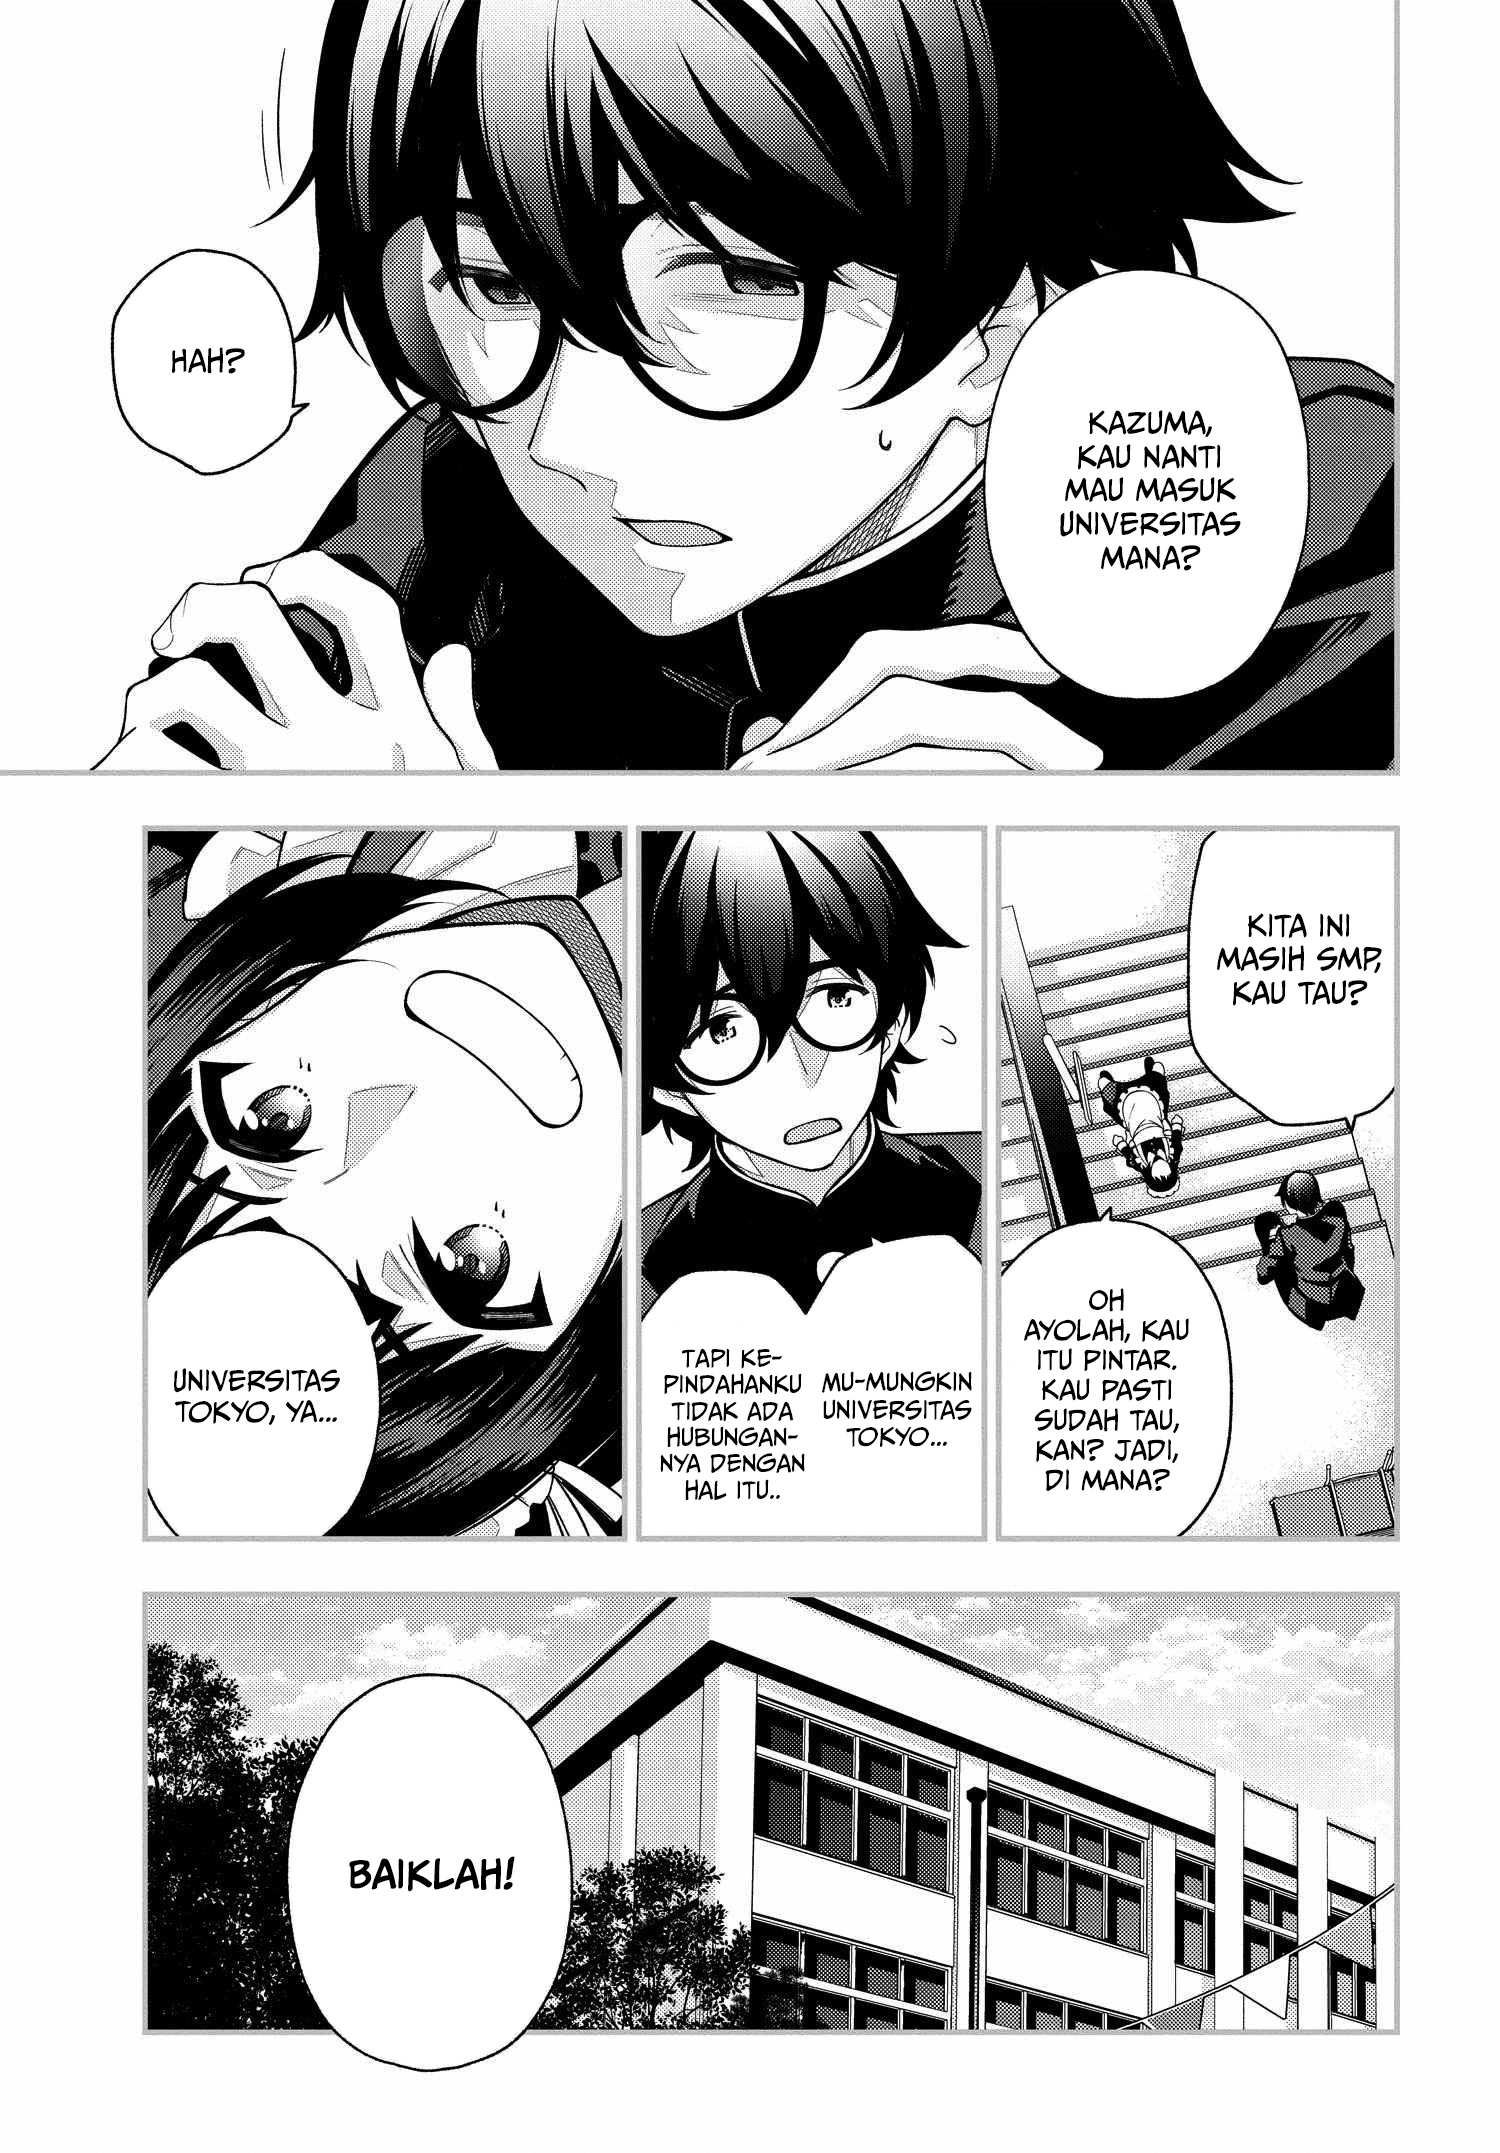 A Choice of Boyfriend and Girlfriend Chapter 01 38